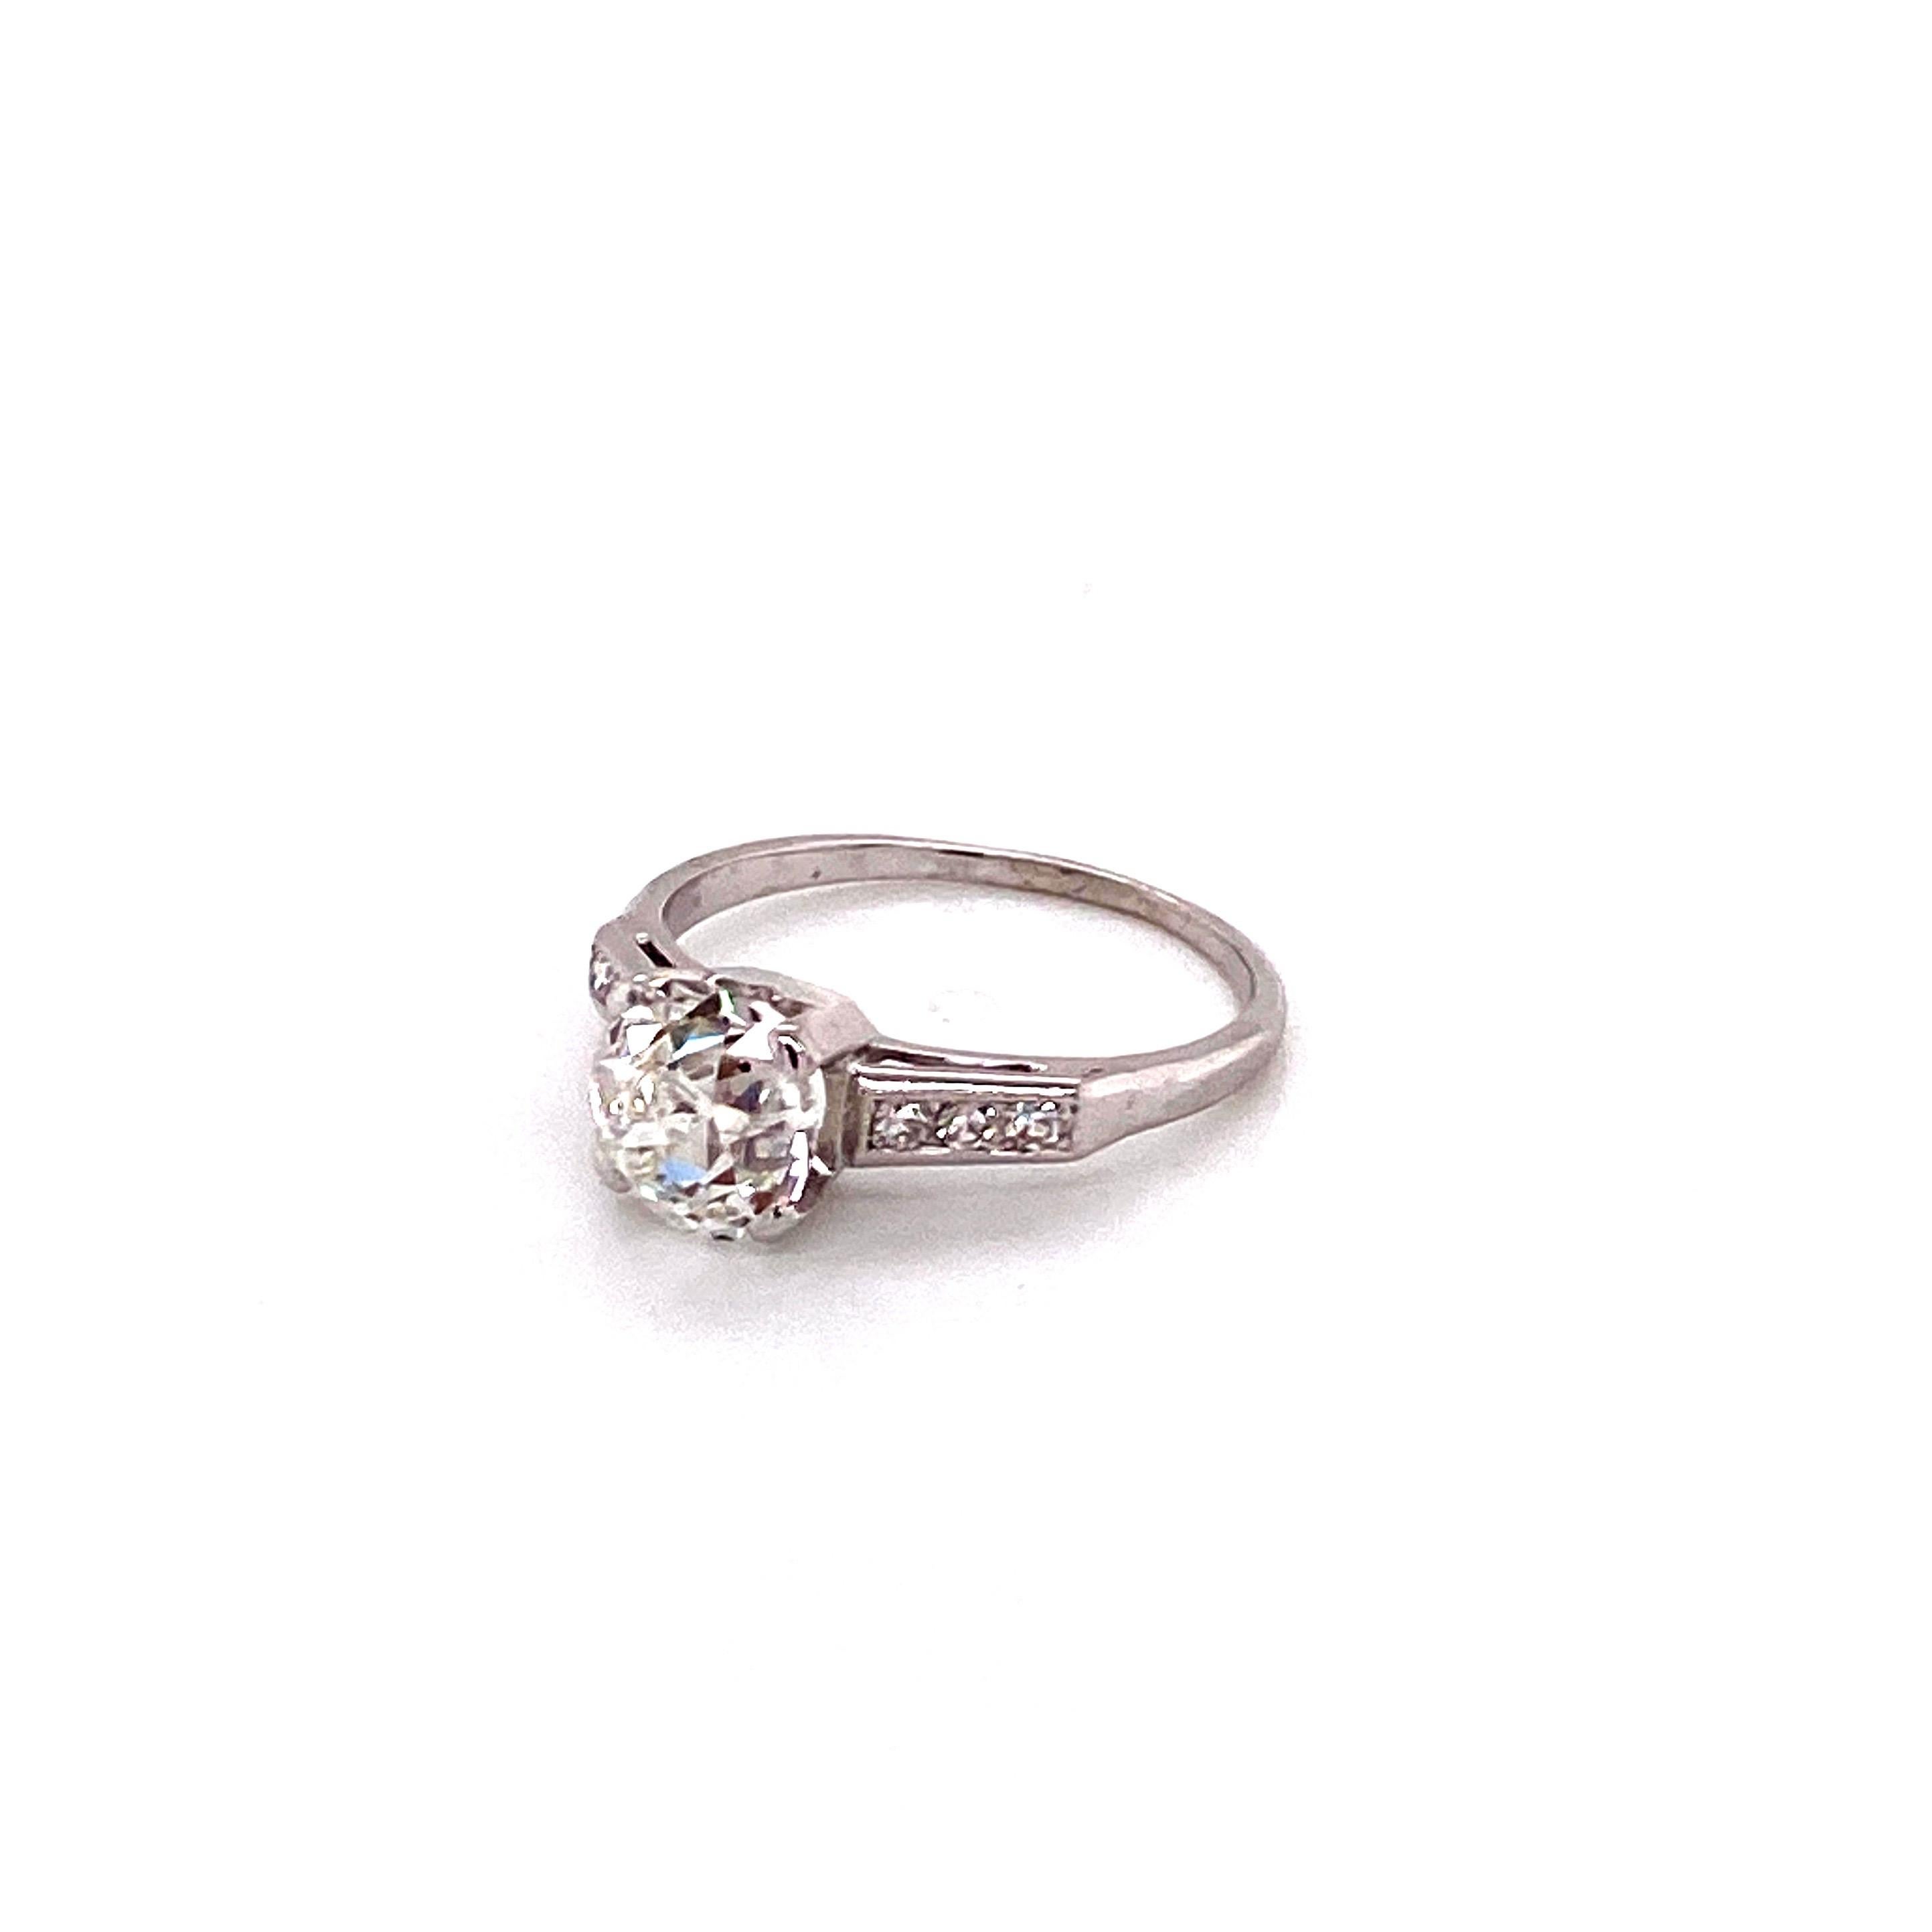 A breathtaking jewel from a glamorous bygone era, this vintage ring dates back to the 1930s. The magnificent centerpiece is an exceptional Old European cut diamond weighing approximately 1.50 carats. Exhibiting a warm antique K color, this